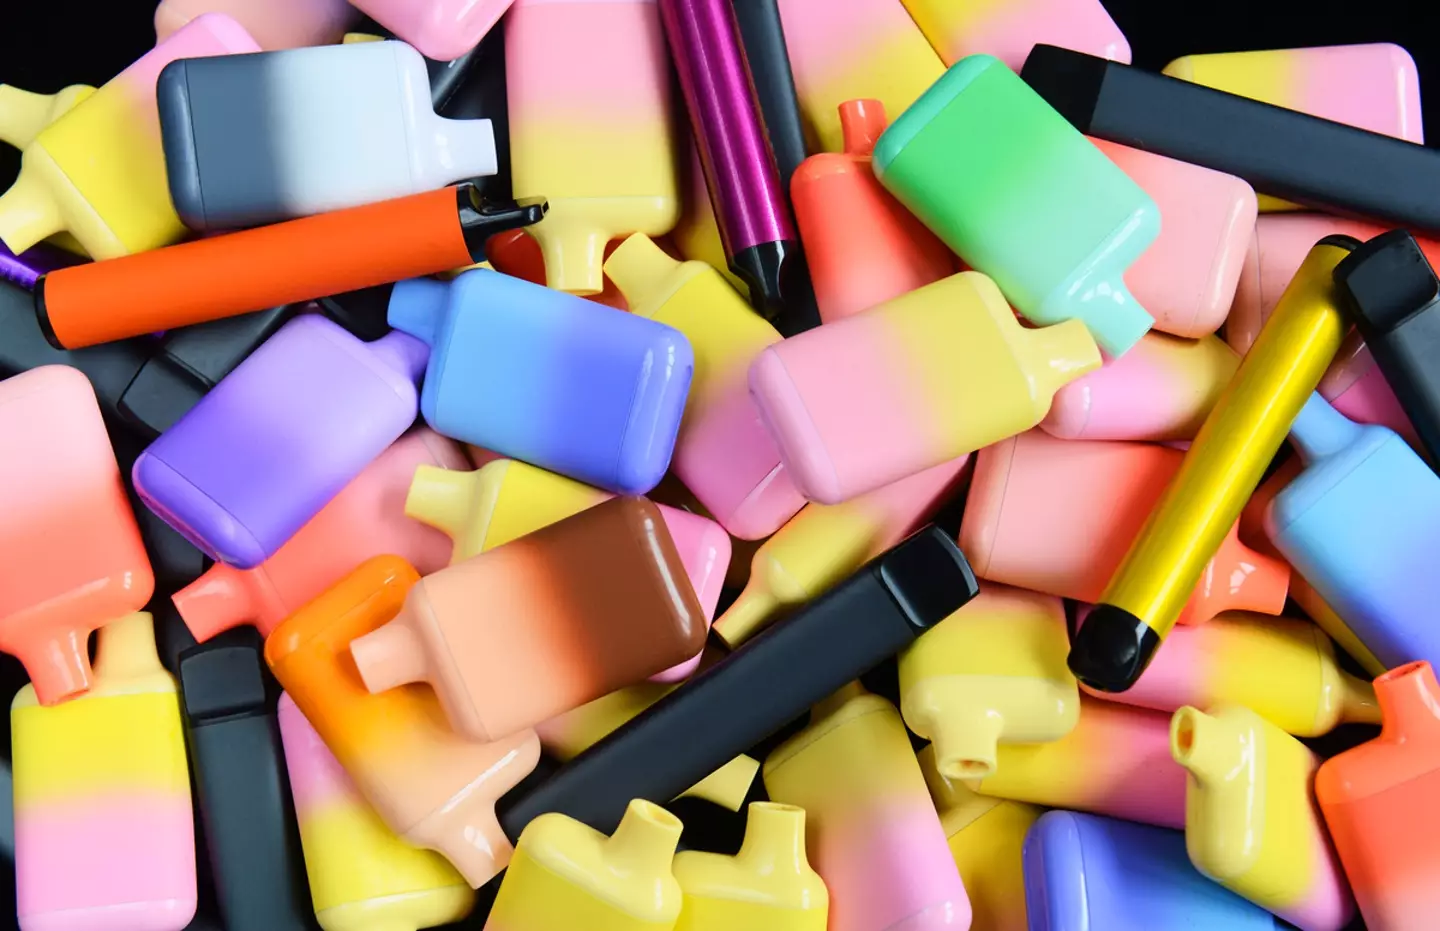 A disposable vape manufacturer is 'fully committed' in its promise to stop selling bright coloured products that could attract children.